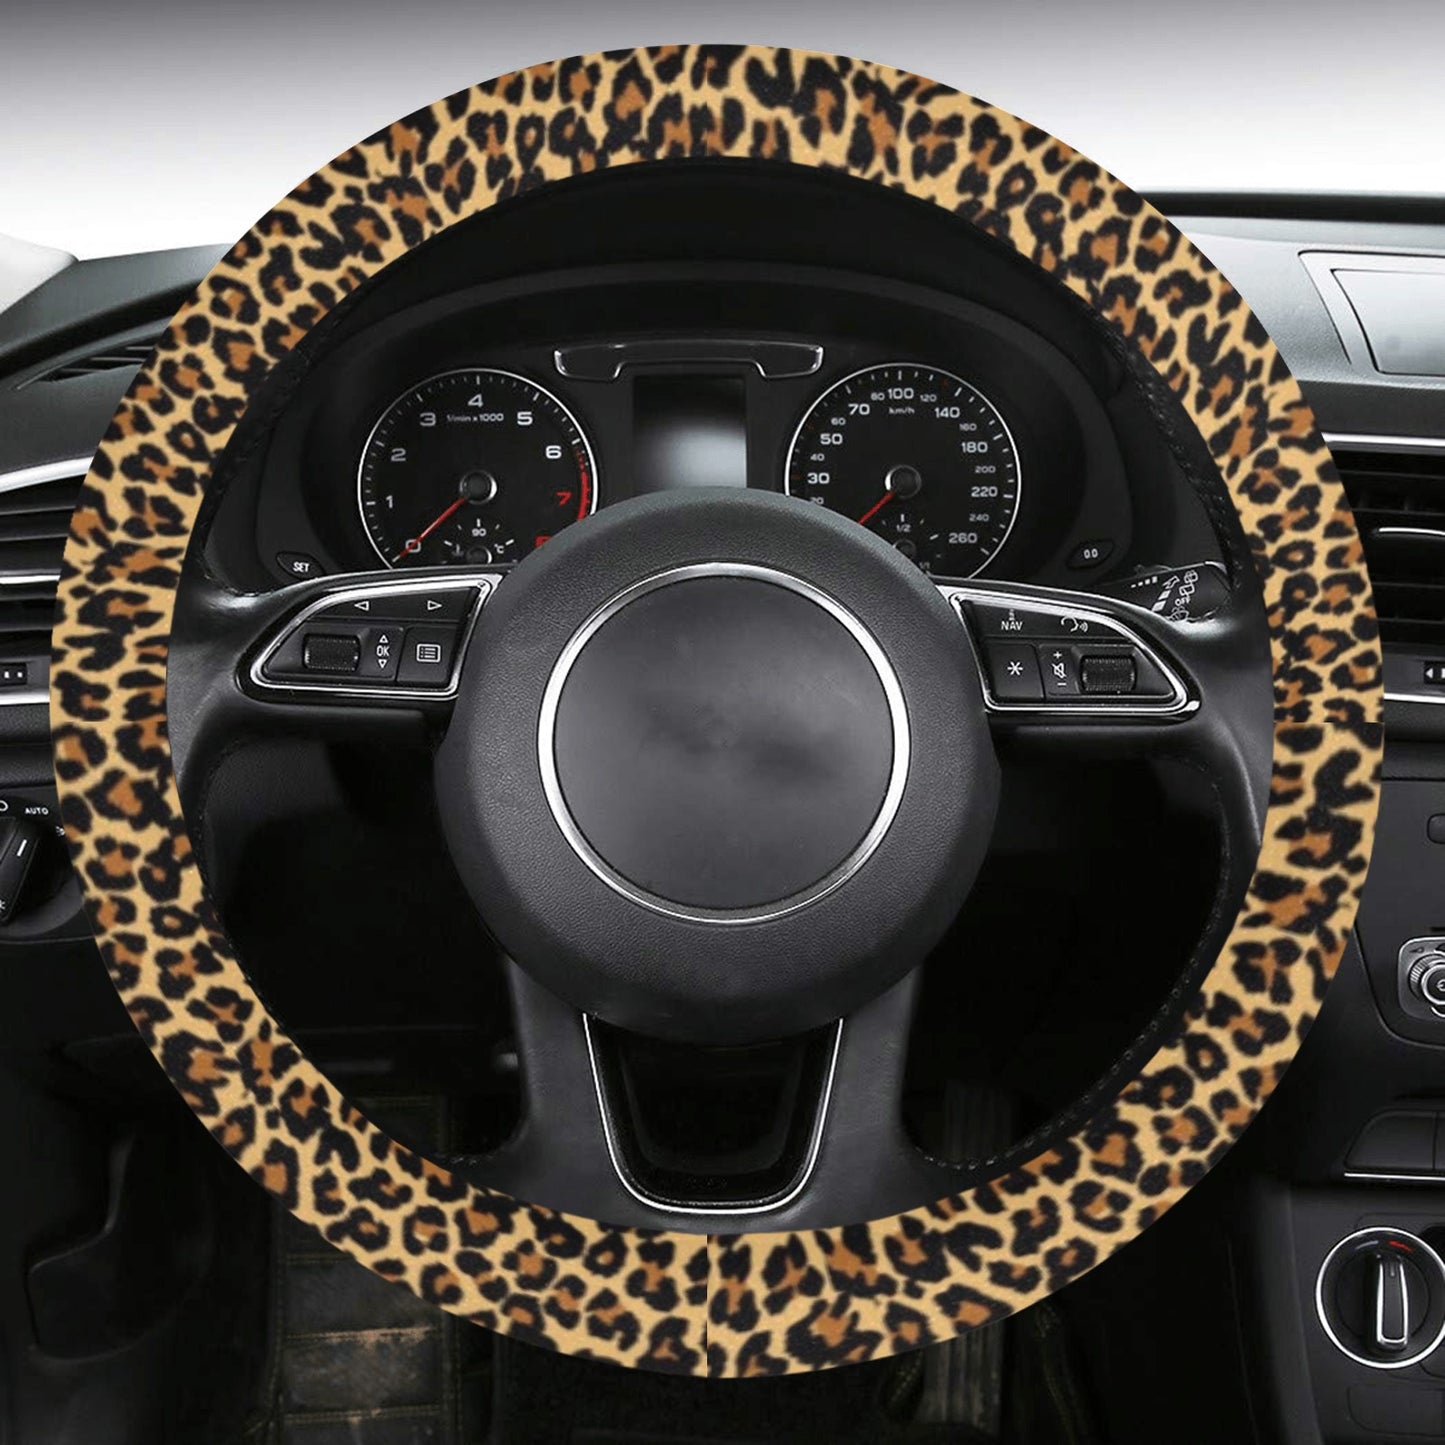 Leopard Steering Wheel Cover with Anti-Slip Insert, Brown Cheetah Animal Print Car Auto Wrap Women Protector Accessories Starcove Fashion